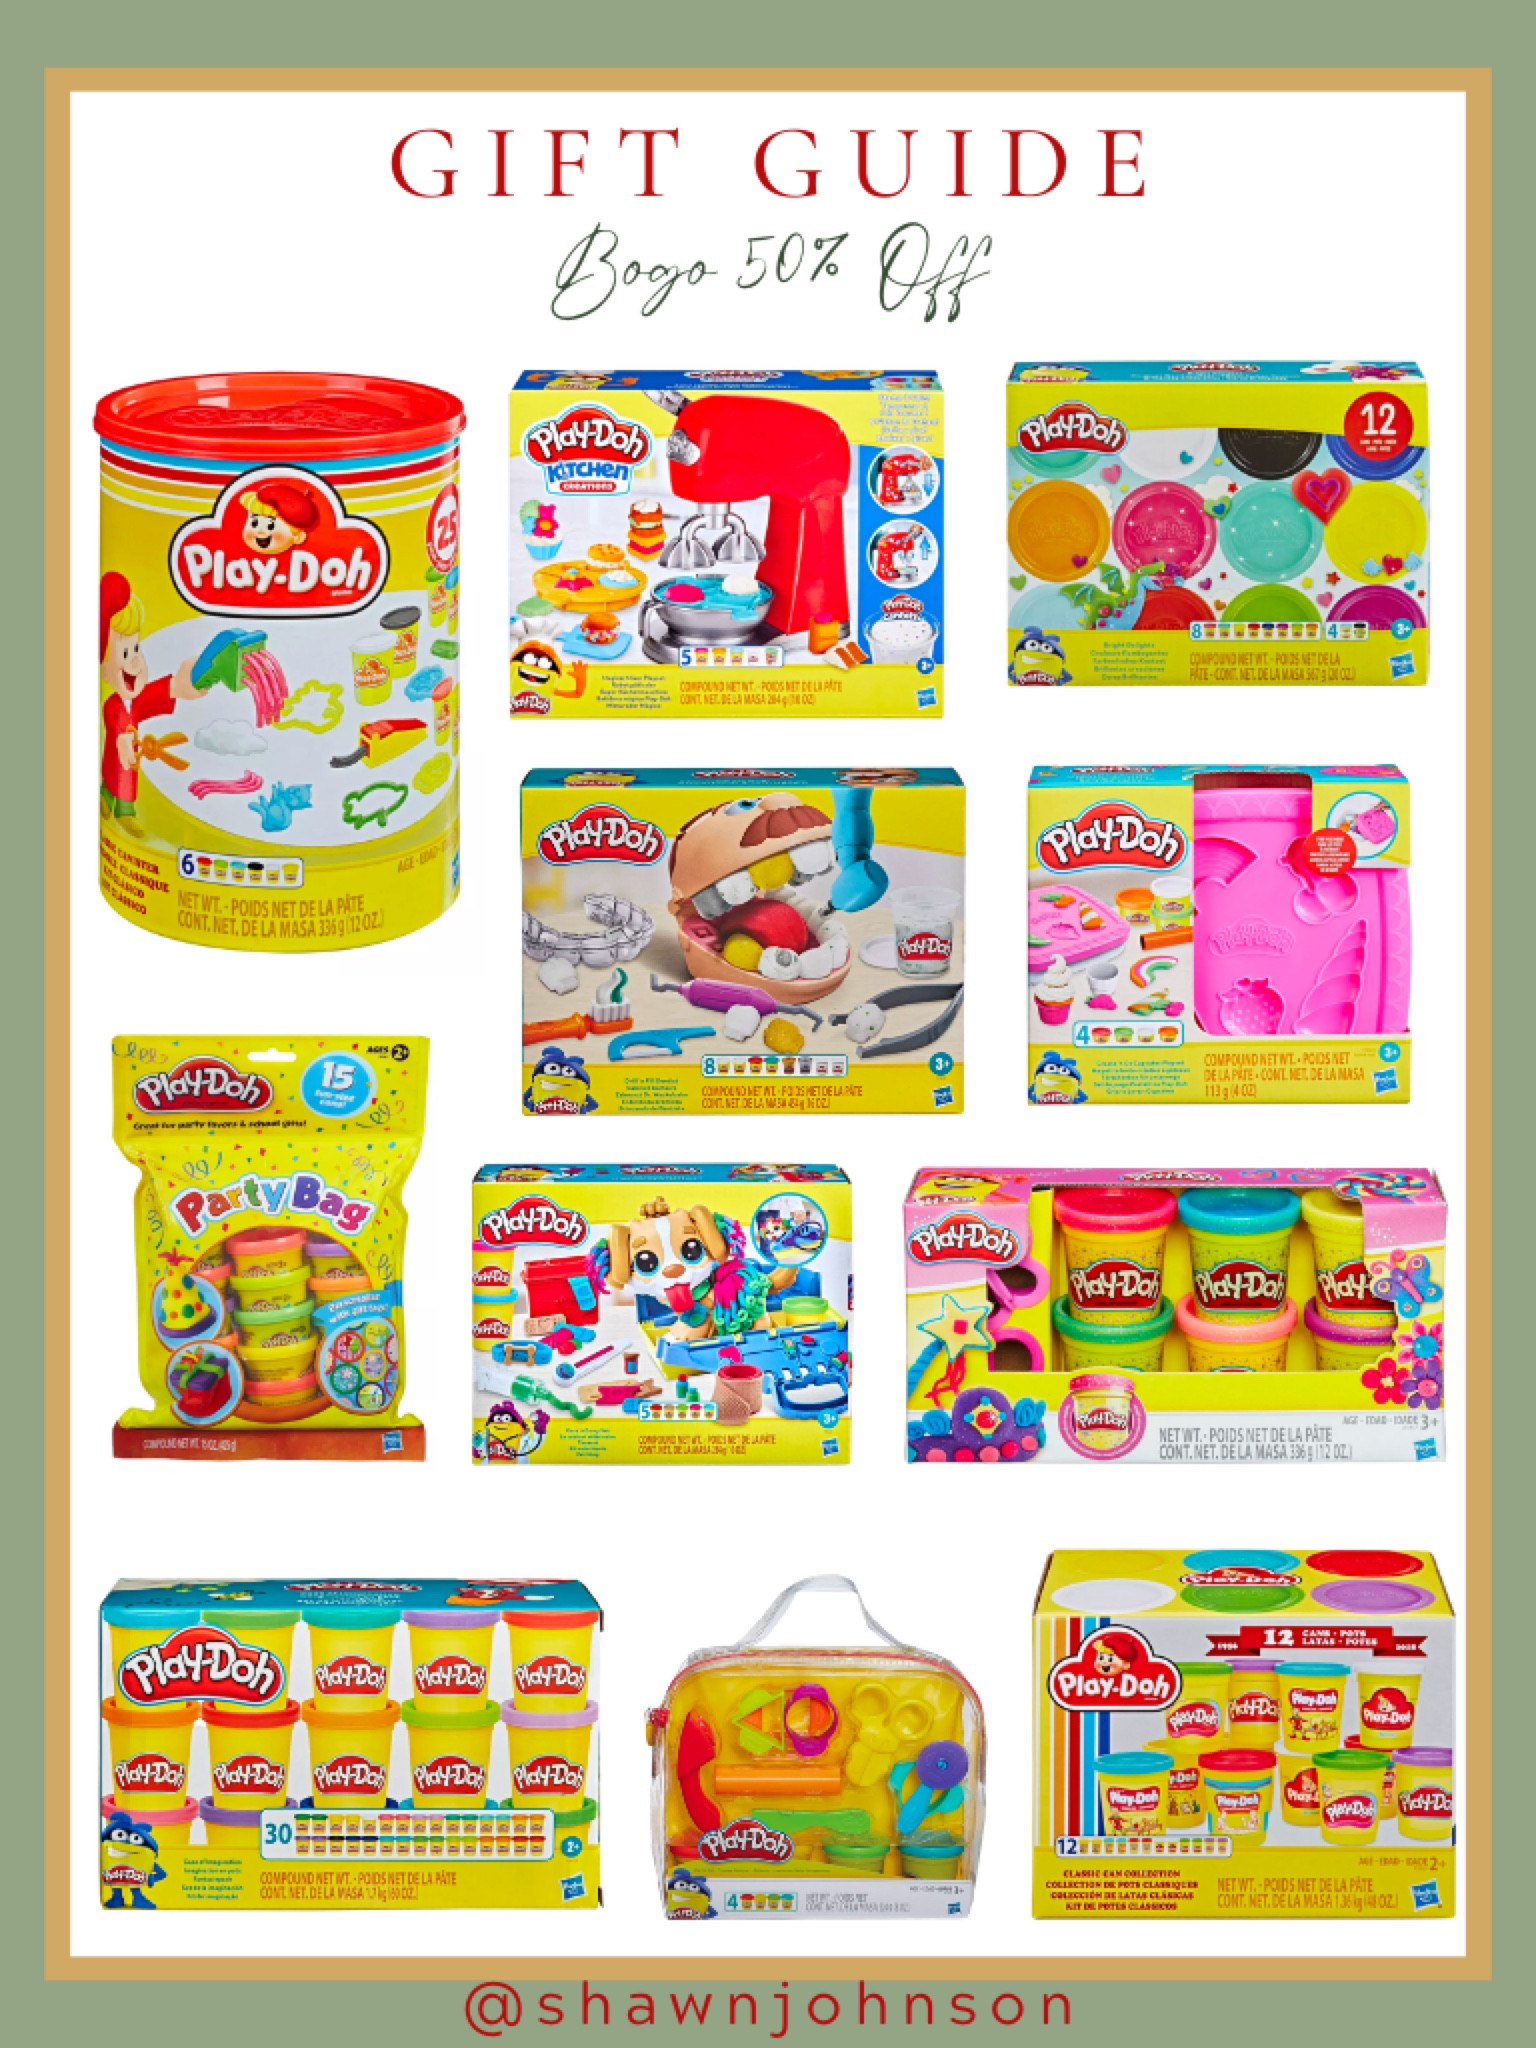 Play-Doh Retro Classic Can Collection - 12pk